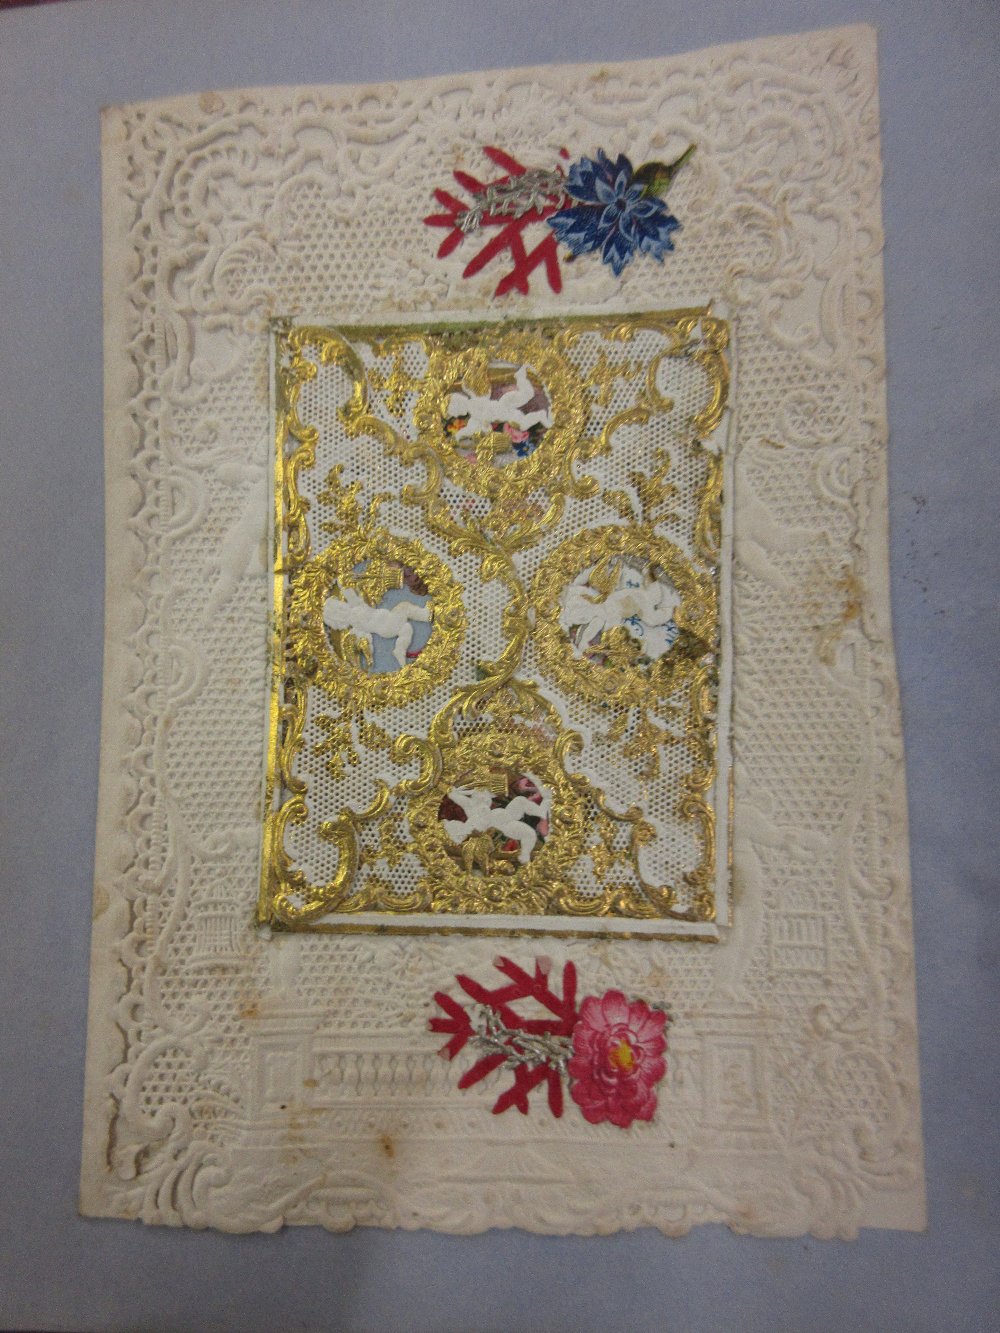 Small red cloth bound album containing a collection of valentines, love tokens, manuscript - Image 5 of 14